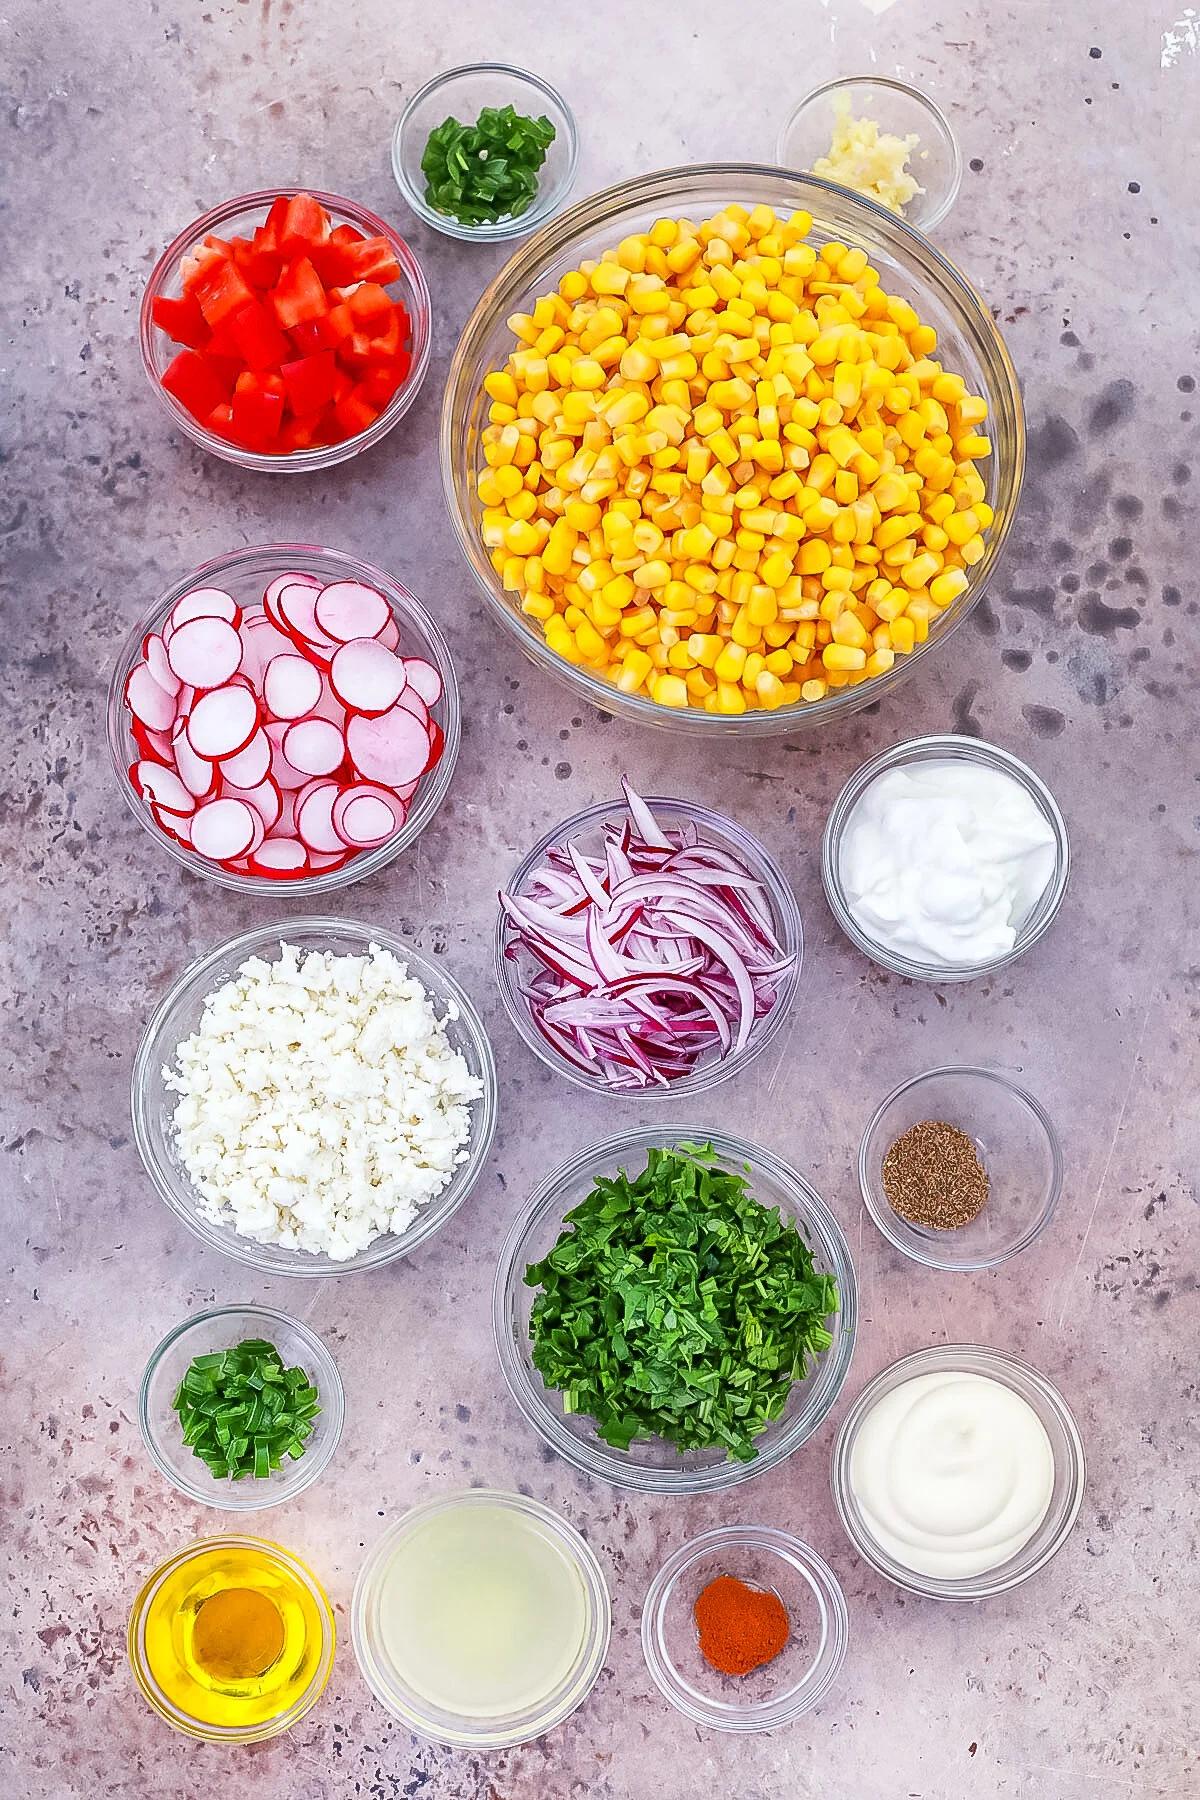 Ingredients for the Mexican Street Corn Salad